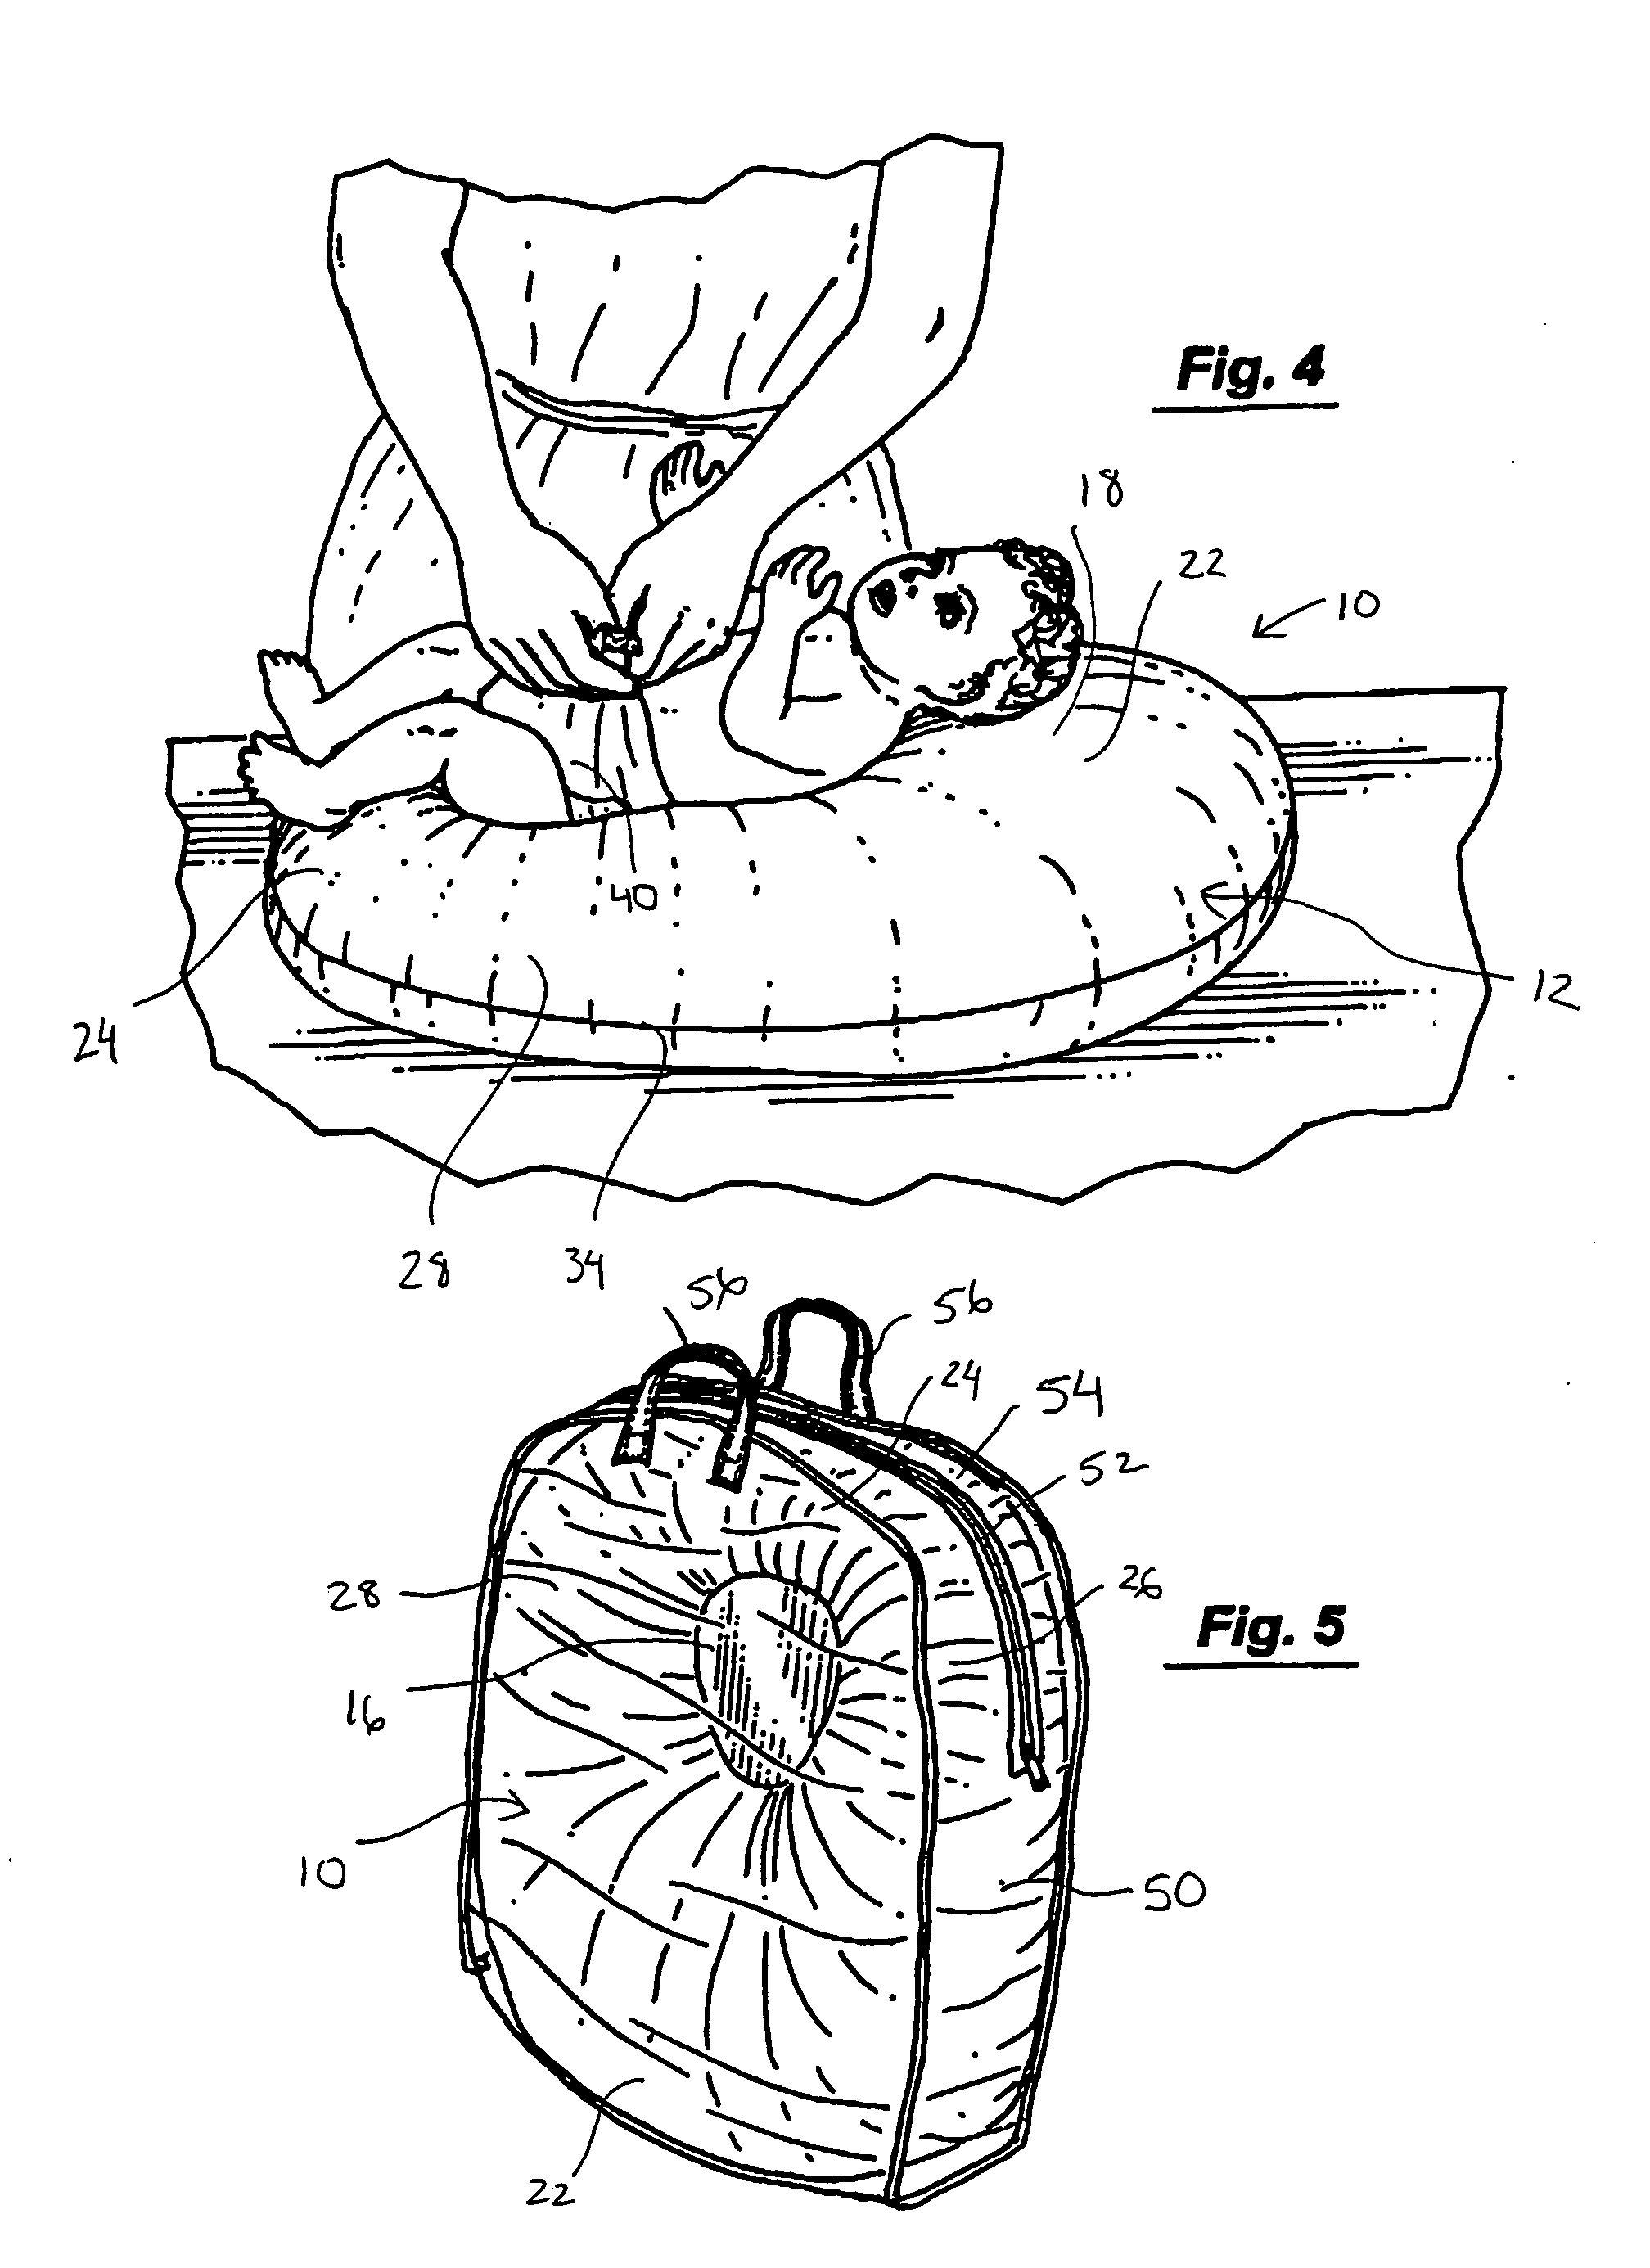 Support pillow for small infants